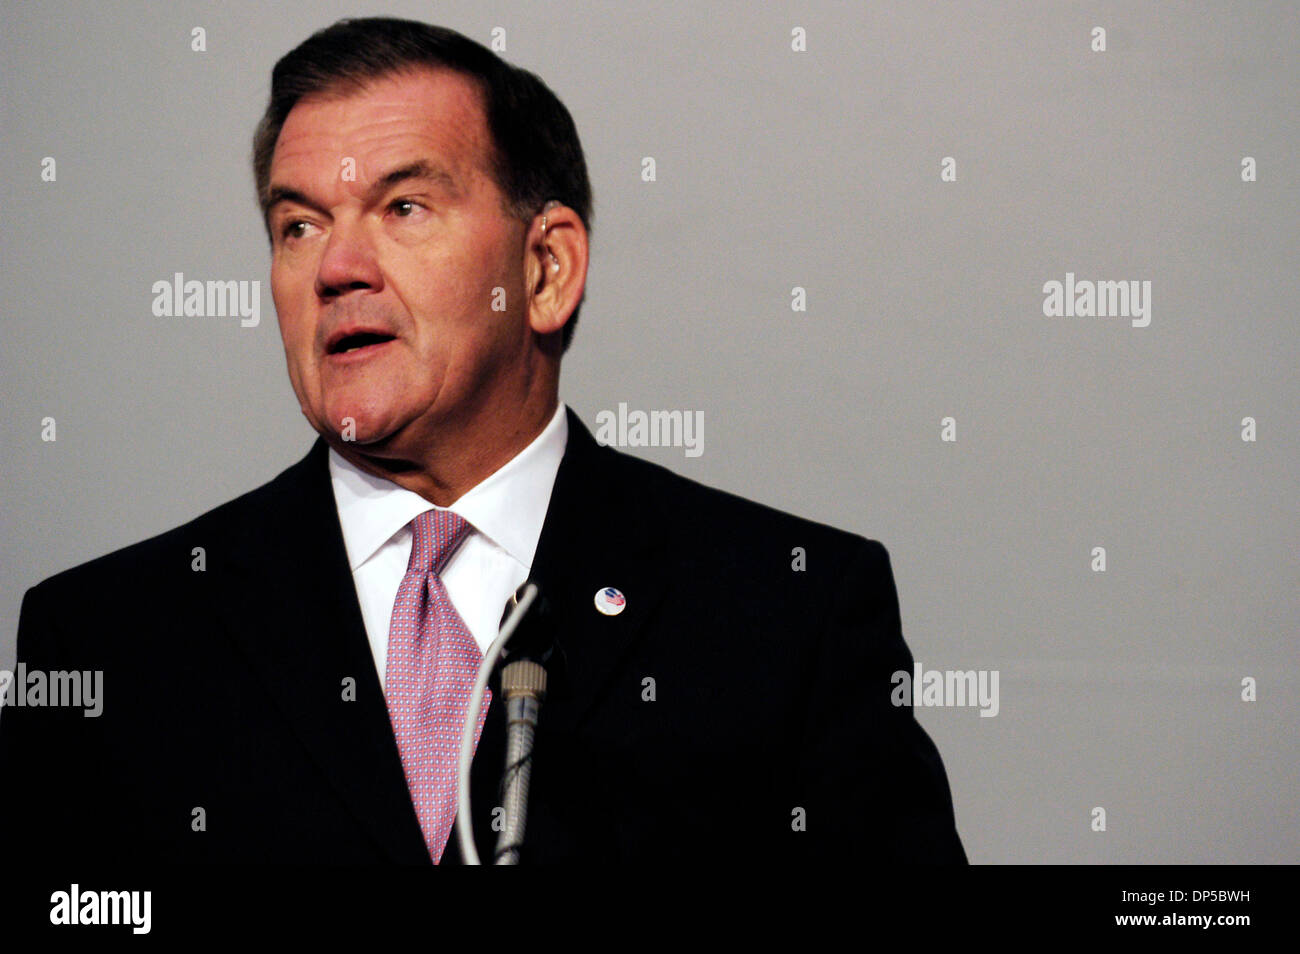 Sep 11, 2006; Shanksville, PA, USA; Former PA Governor TOM RIDGE speaks at  the 5th anniversary of United Flight 93 on 9/11 a temporary memorial was set up for United Flight 93, that was thwarted by hijackers and crashed in a grassy field on September 11, 2001 in Shanksville, PA, 80 miles south of Pittsburgh.  Mandatory Credit: Photo by C. E. Mitchell/ZUMA Press. (©) Copyright 2006 Stock Photo